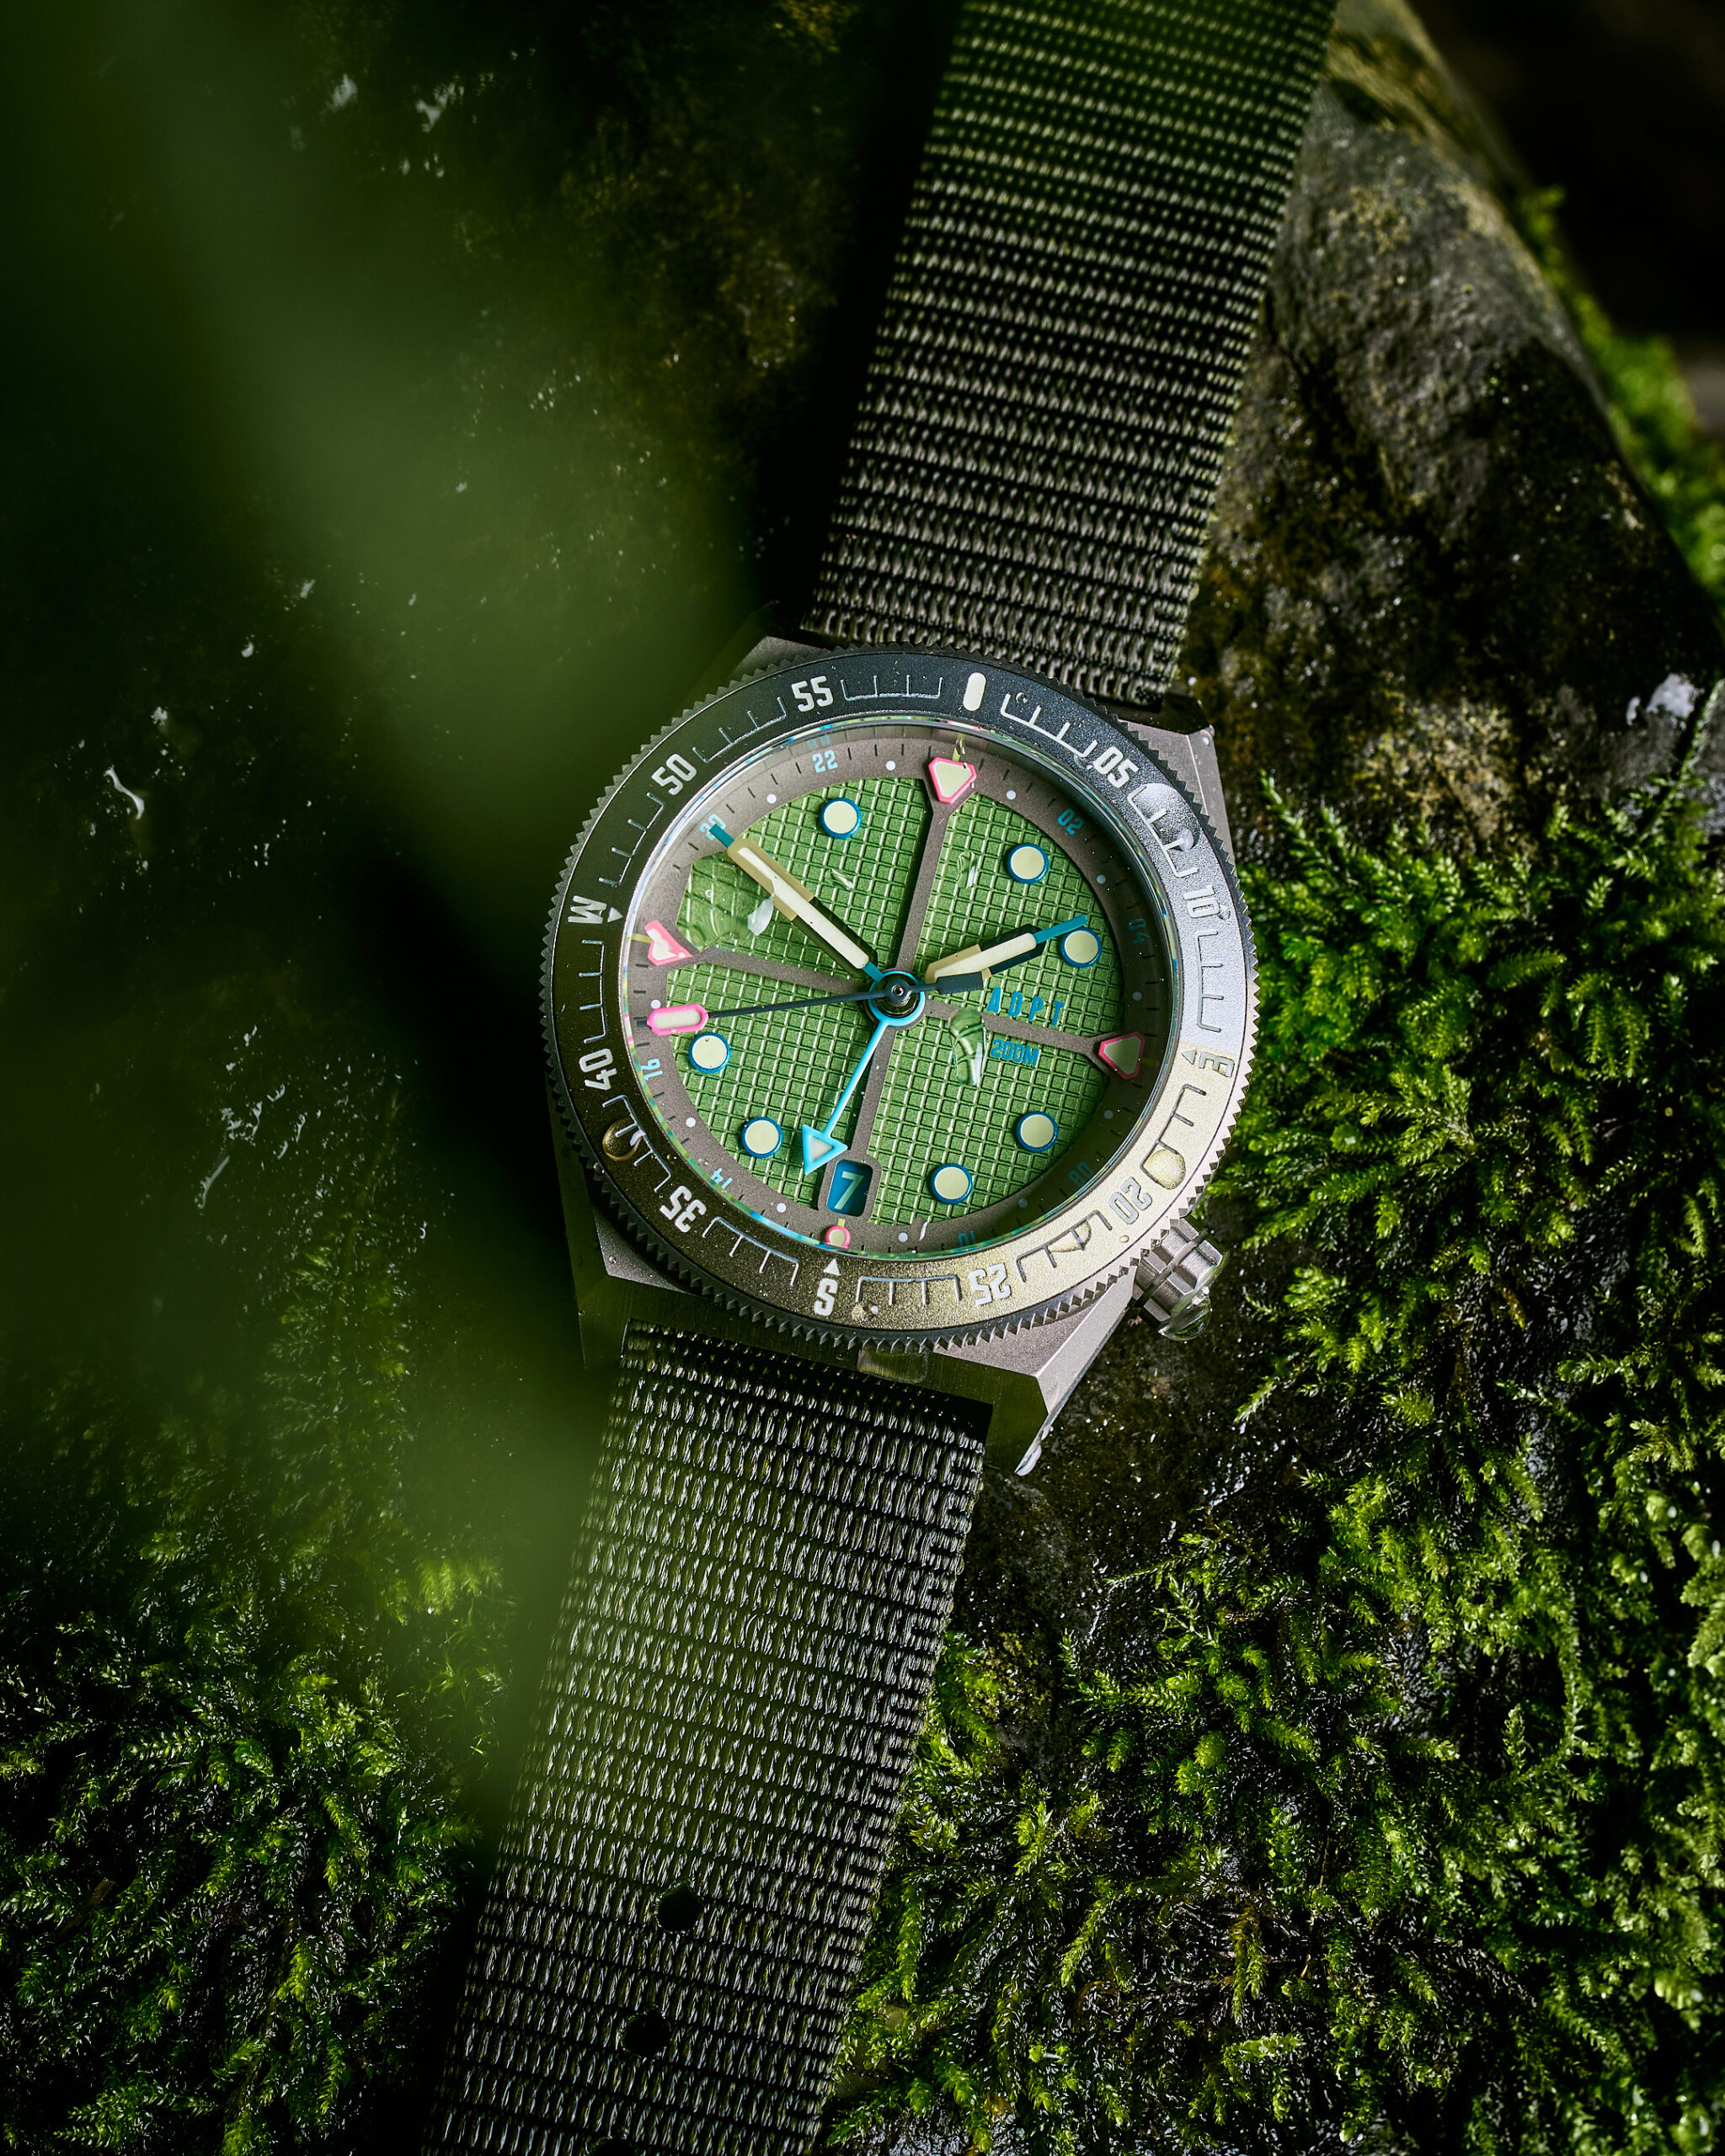 EDC Meets Adventure With the ADPT Series 1 Dual-Time Watch